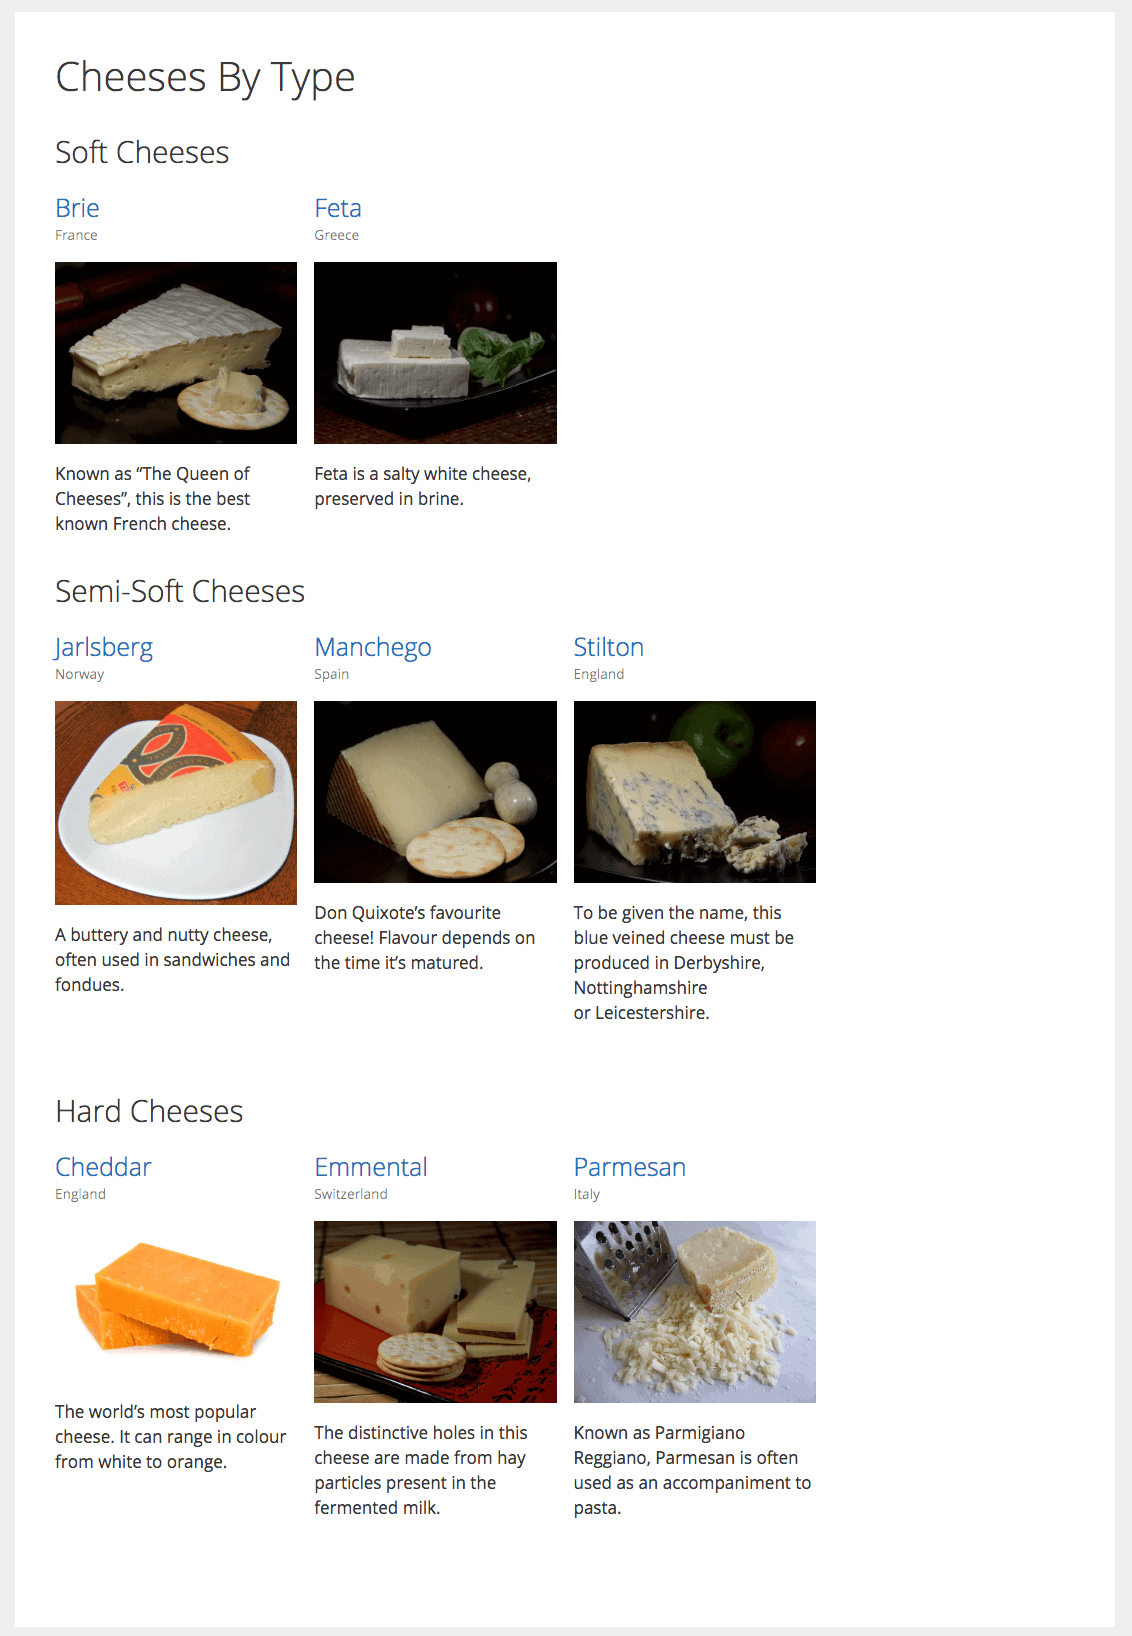 Cheeses shown by type - soft, semi-soft or hard